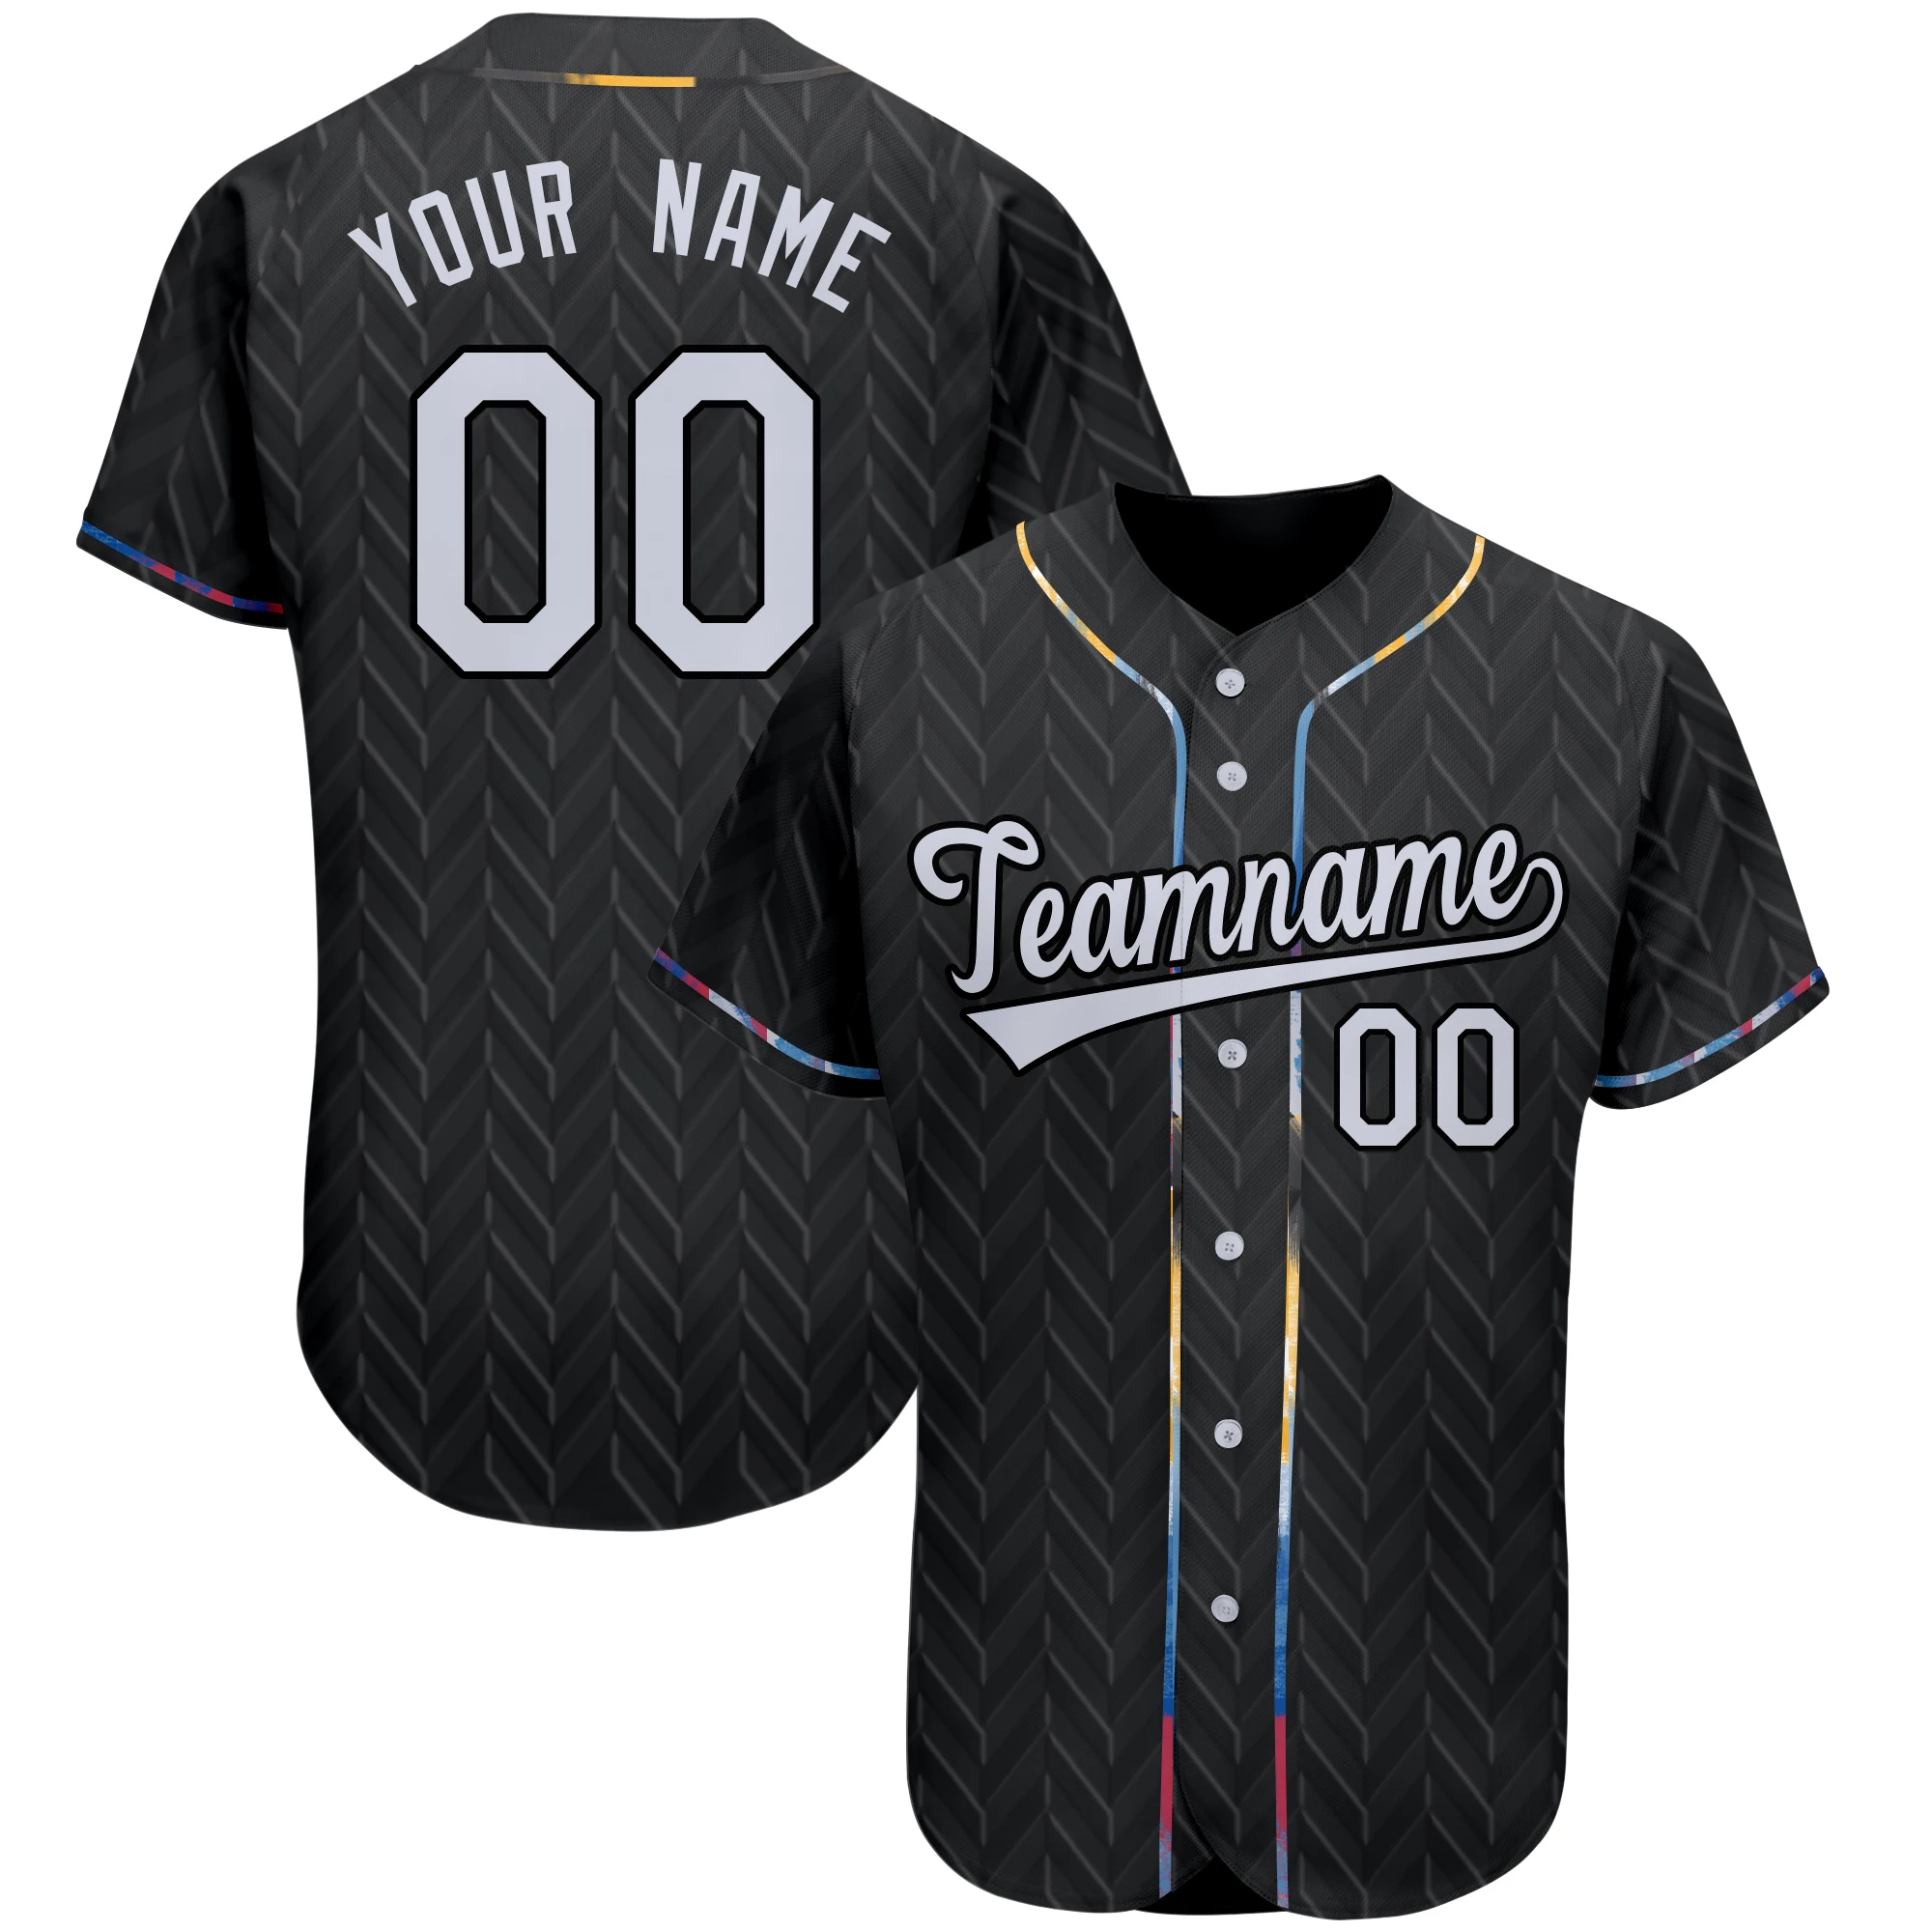 Customized Professional Baseball Shirts Softball Training Jerseys Personalized Design of Your Team Name and Number Fan Uniforms